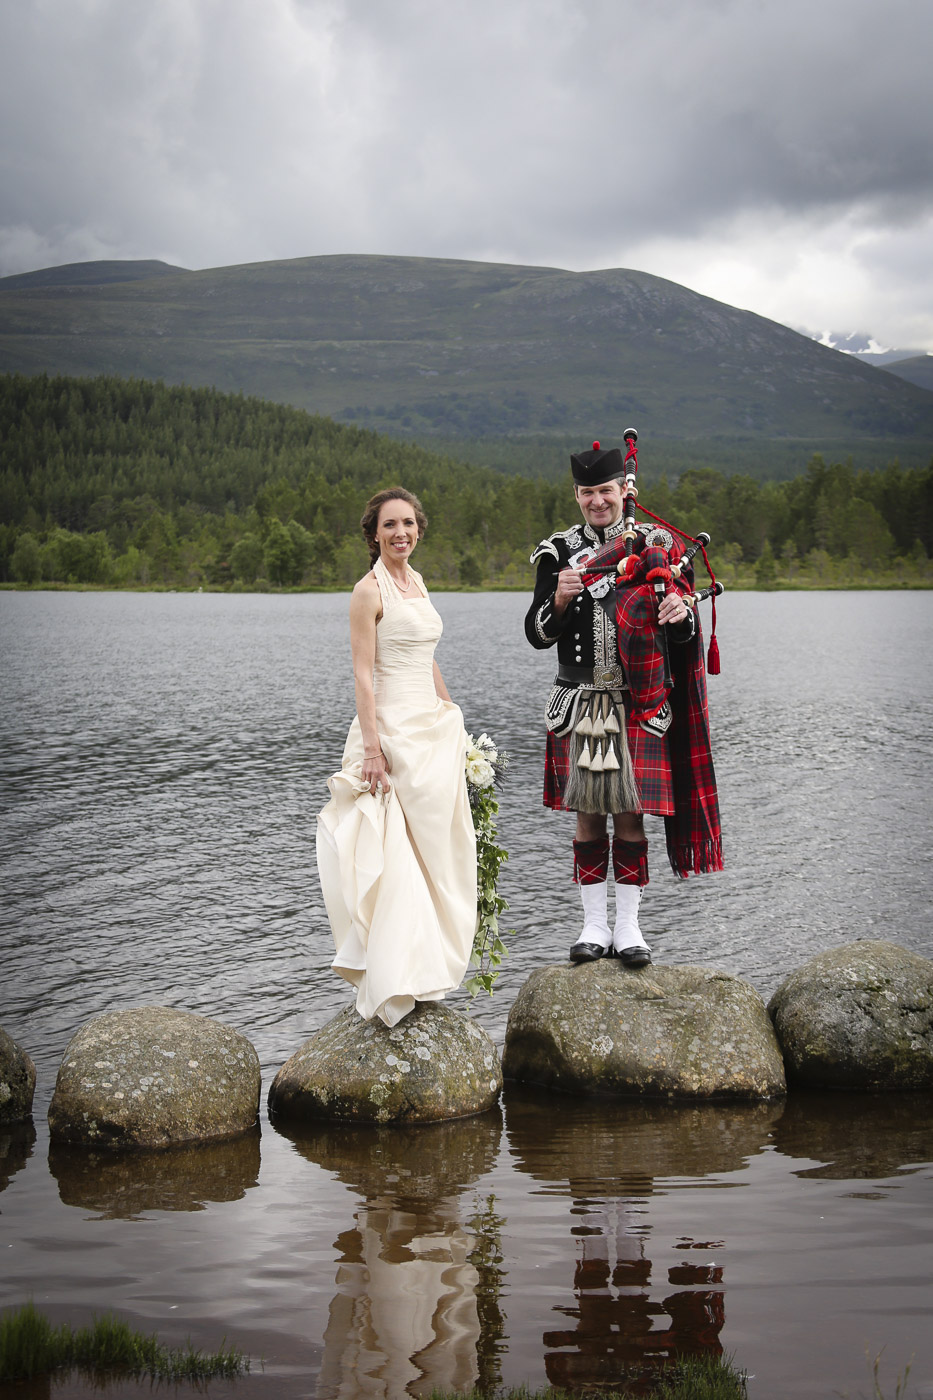 wedding photography at the Hilton Coylumbridge and Loch Morlich, Aviemore-1040 - Copy